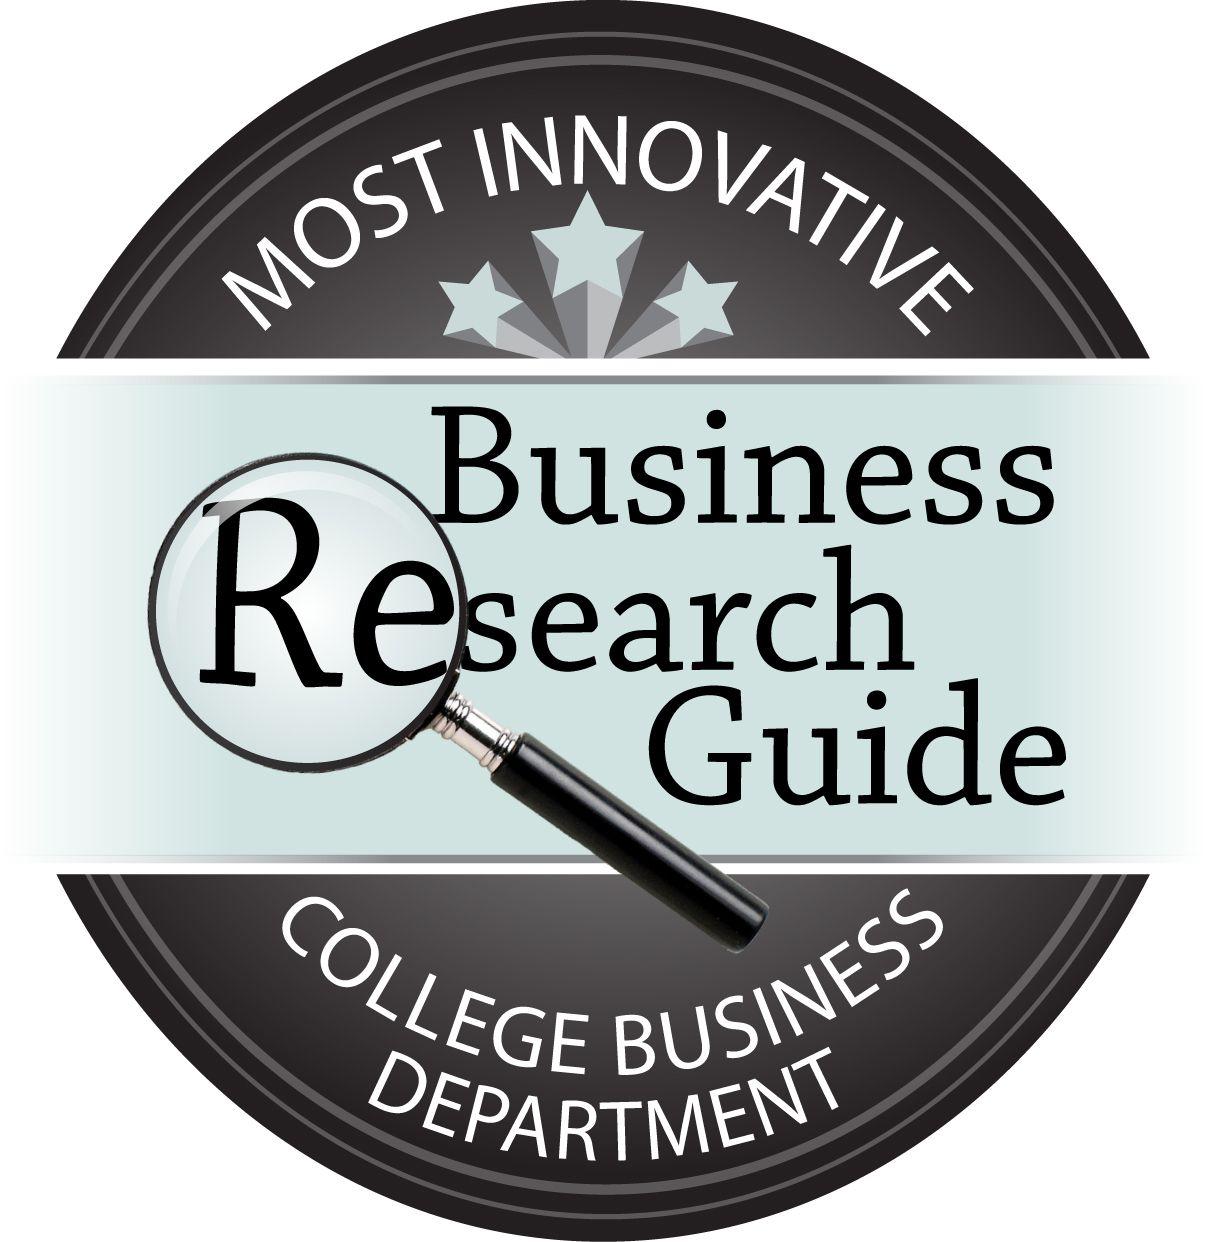 Business Department Logo - 50 Most Innovative Small College Business Departments 2015